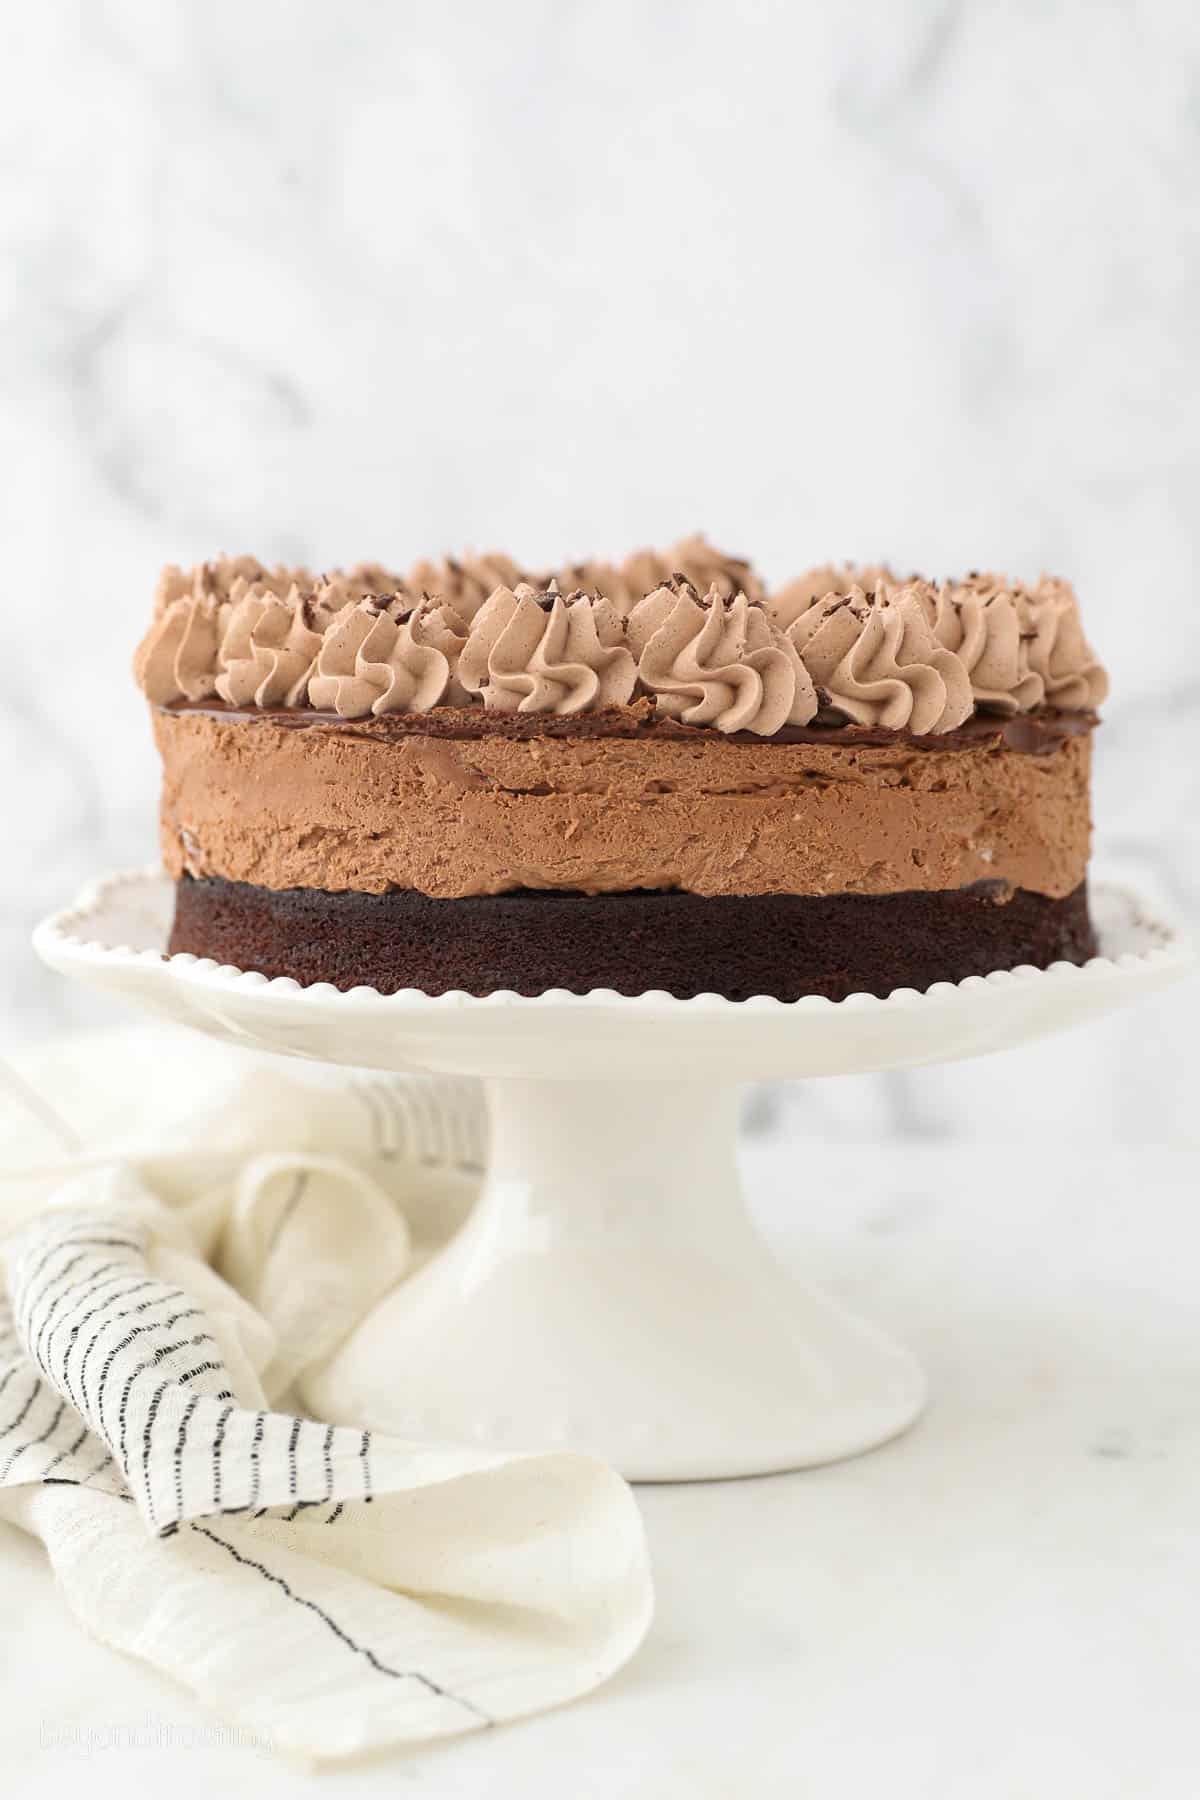 A whole chocolate mousse cake on a white ruffled cake stand.